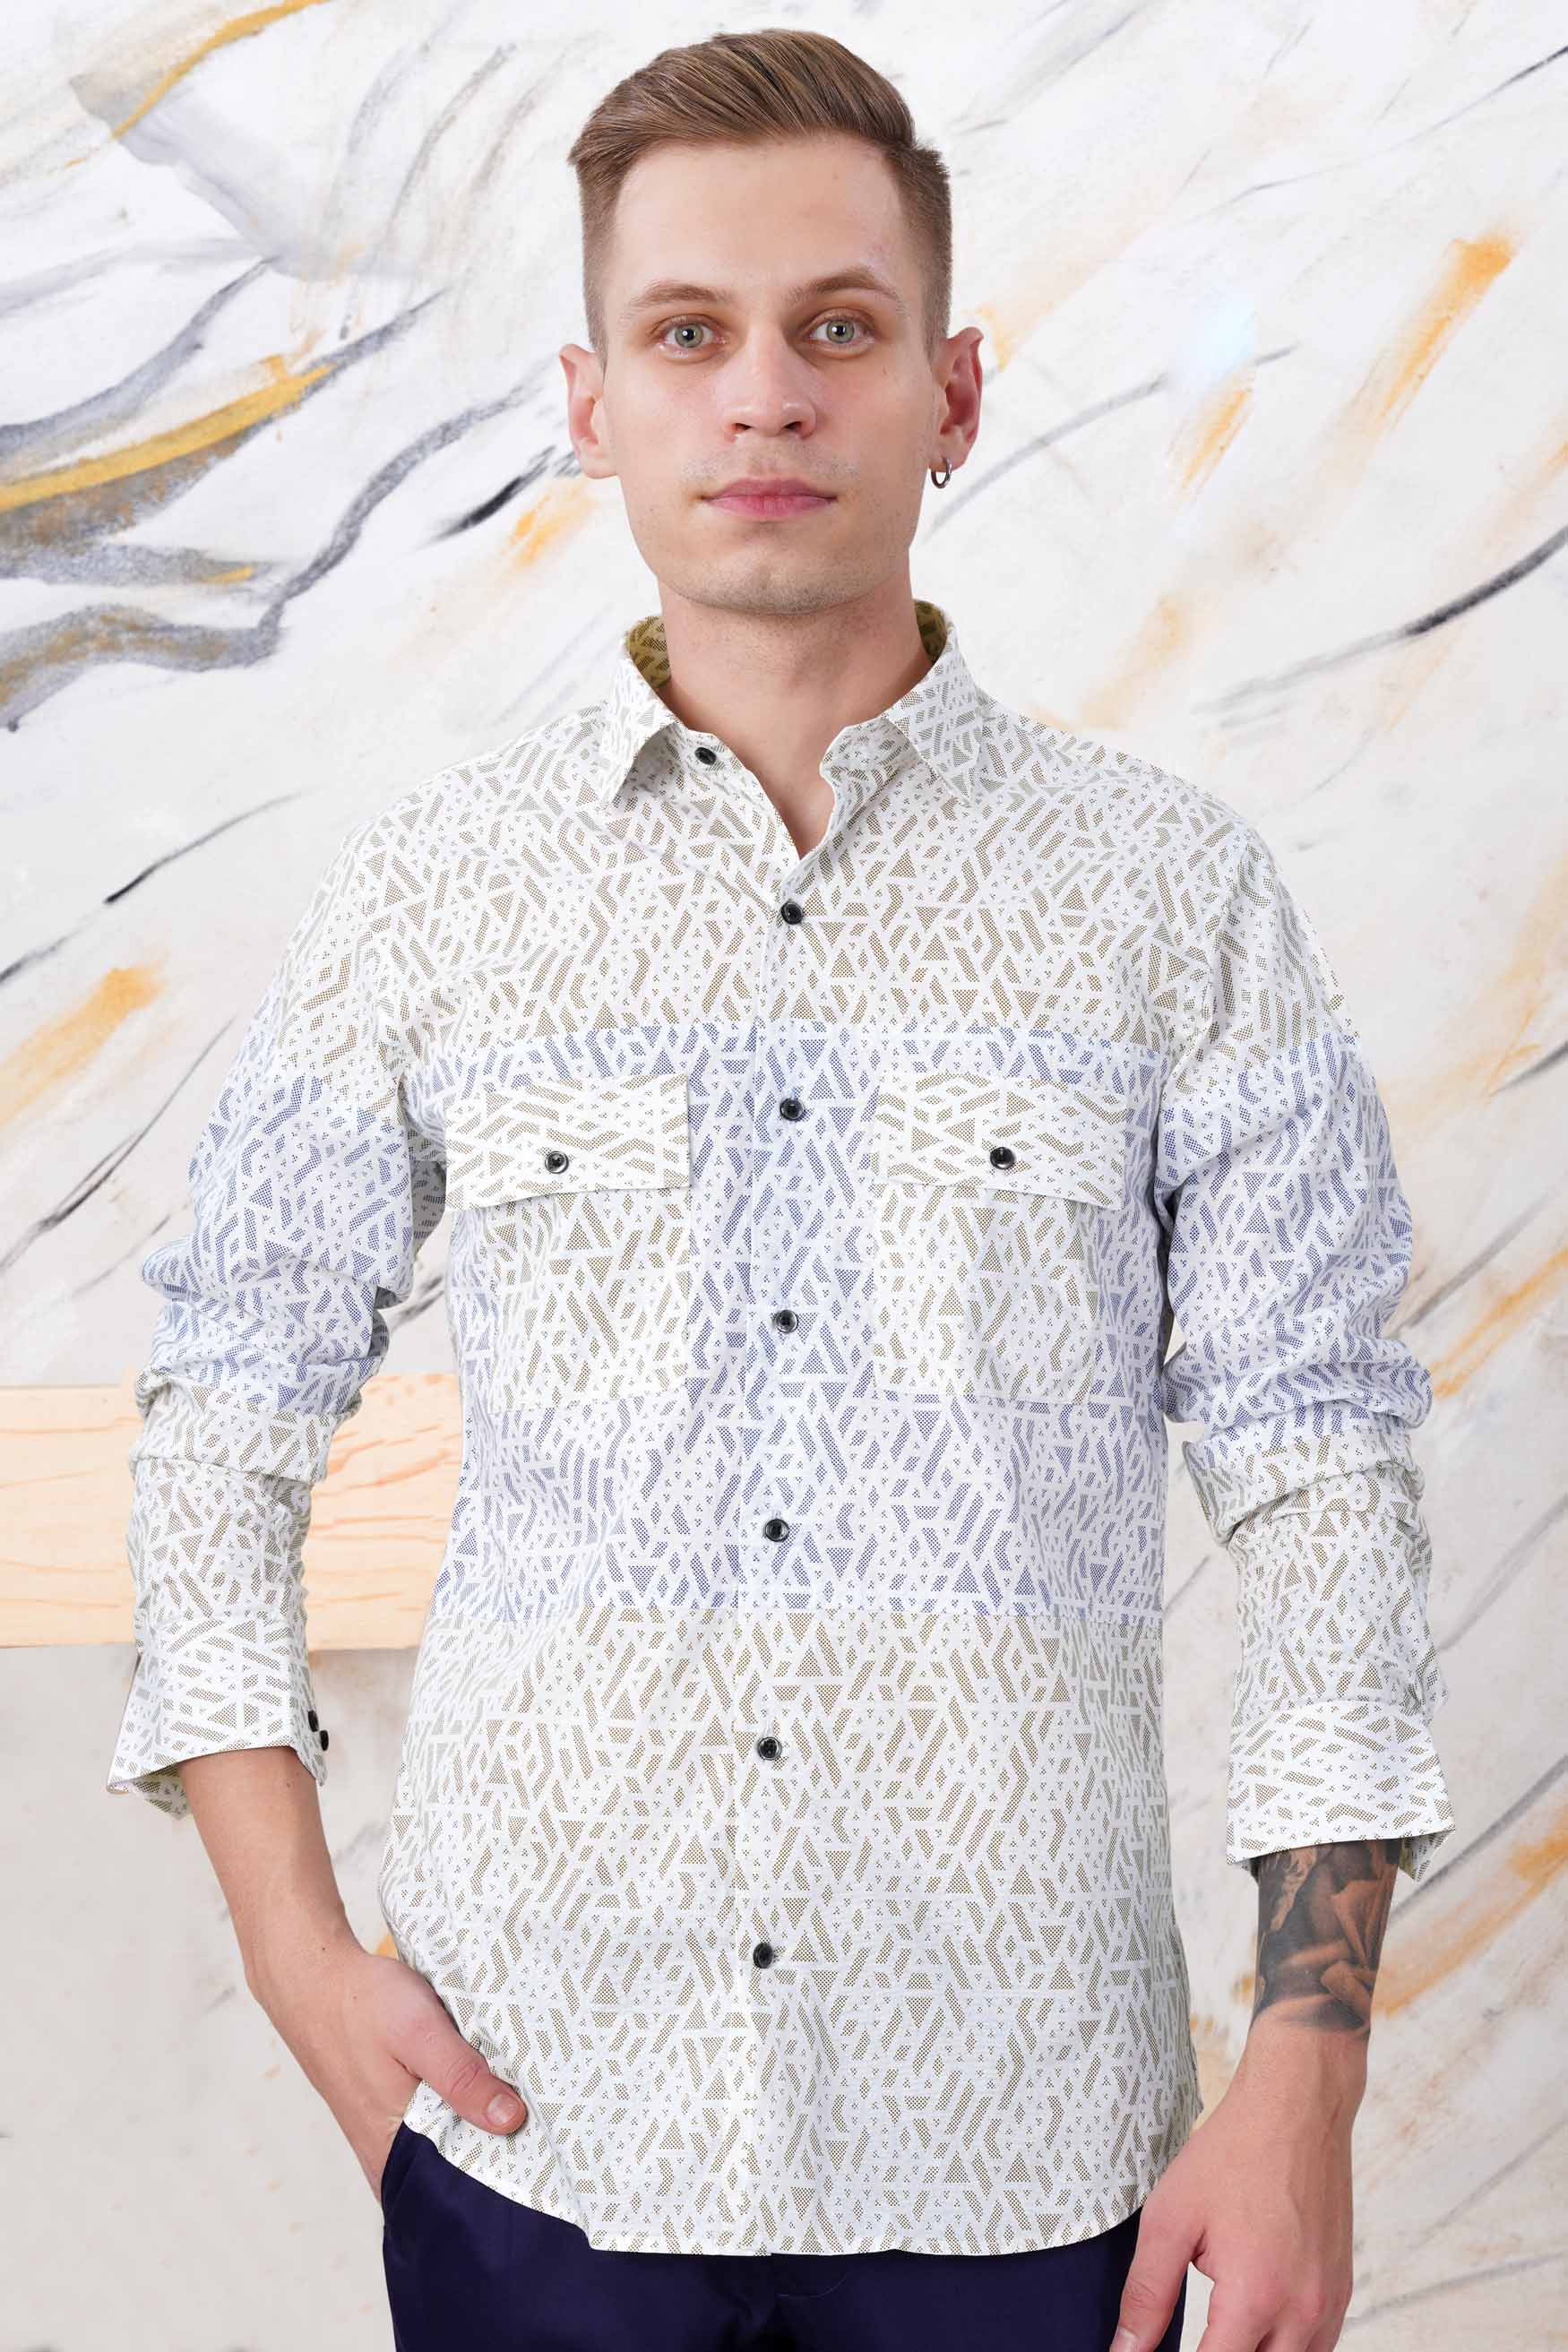 Bright White with Cork Brown and Nile Blue Printed Subtle Sheen Super Soft Premium Cotton Designer Shirt 11567-BLK-FP-38, 11567-BLK-FP-H-38, 11567-BLK-FP-39, 11567-BLK-FP-H-39, 11567-BLK-FP-40, 11567-BLK-FP-H-40, 11567-BLK-FP-42, 11567-BLK-FP-H-42, 11567-BLK-FP-44, 11567-BLK-FP-H-44, 11567-BLK-FP-46, 11567-BLK-FP-H-46, 11567-BLK-FP-48, 11567-BLK-FP-H-48, 11567-BLK-FP-50, 11567-BLK-FP-H-50, 11567-BLK-FP-52, 11567-BLK-FP-H-52